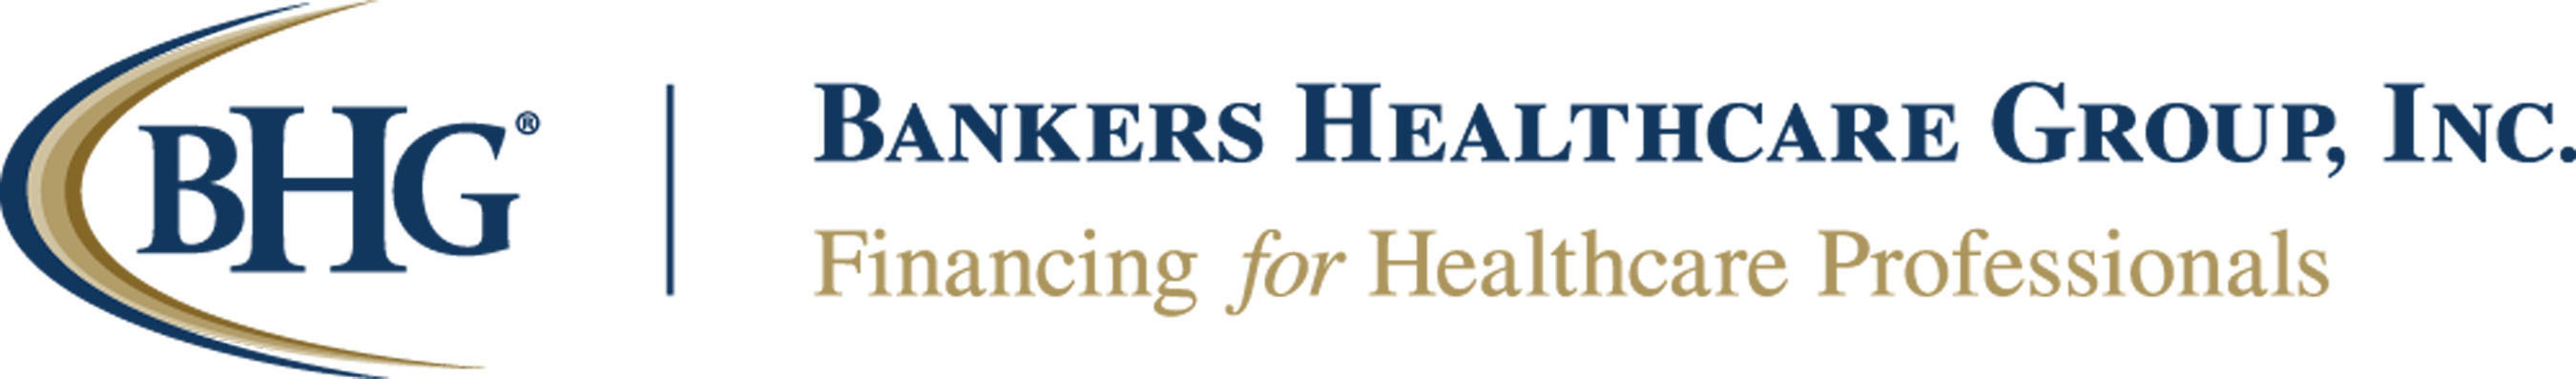 Bankers Healthcare Group, the leading provider of working capital to healthcare professionals.